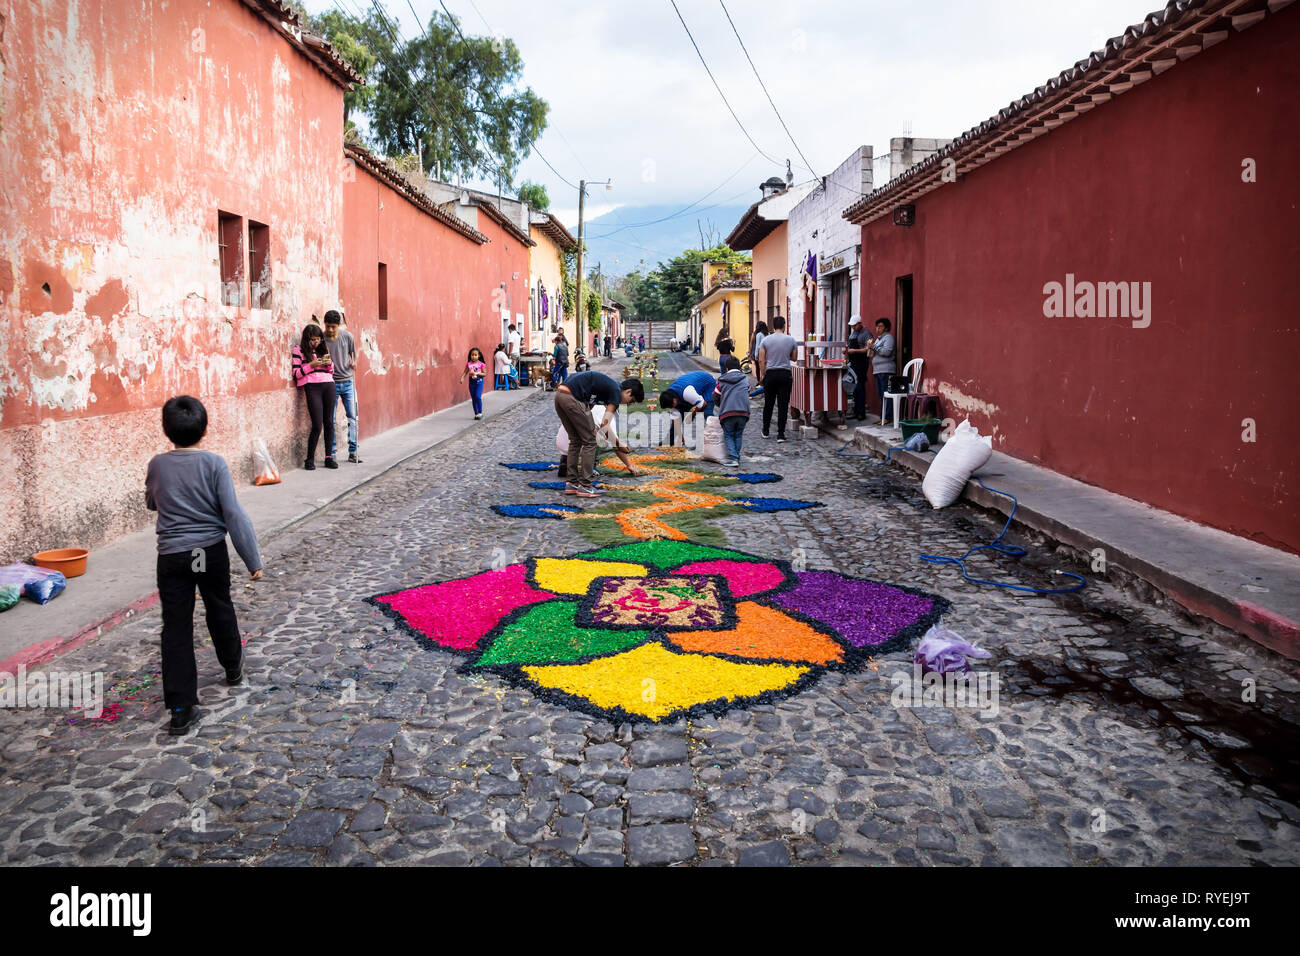 Antigua, Guatamala - 23 March 2018: People making alfombre colourful flower carpets on the cobbled streets Stock Photo